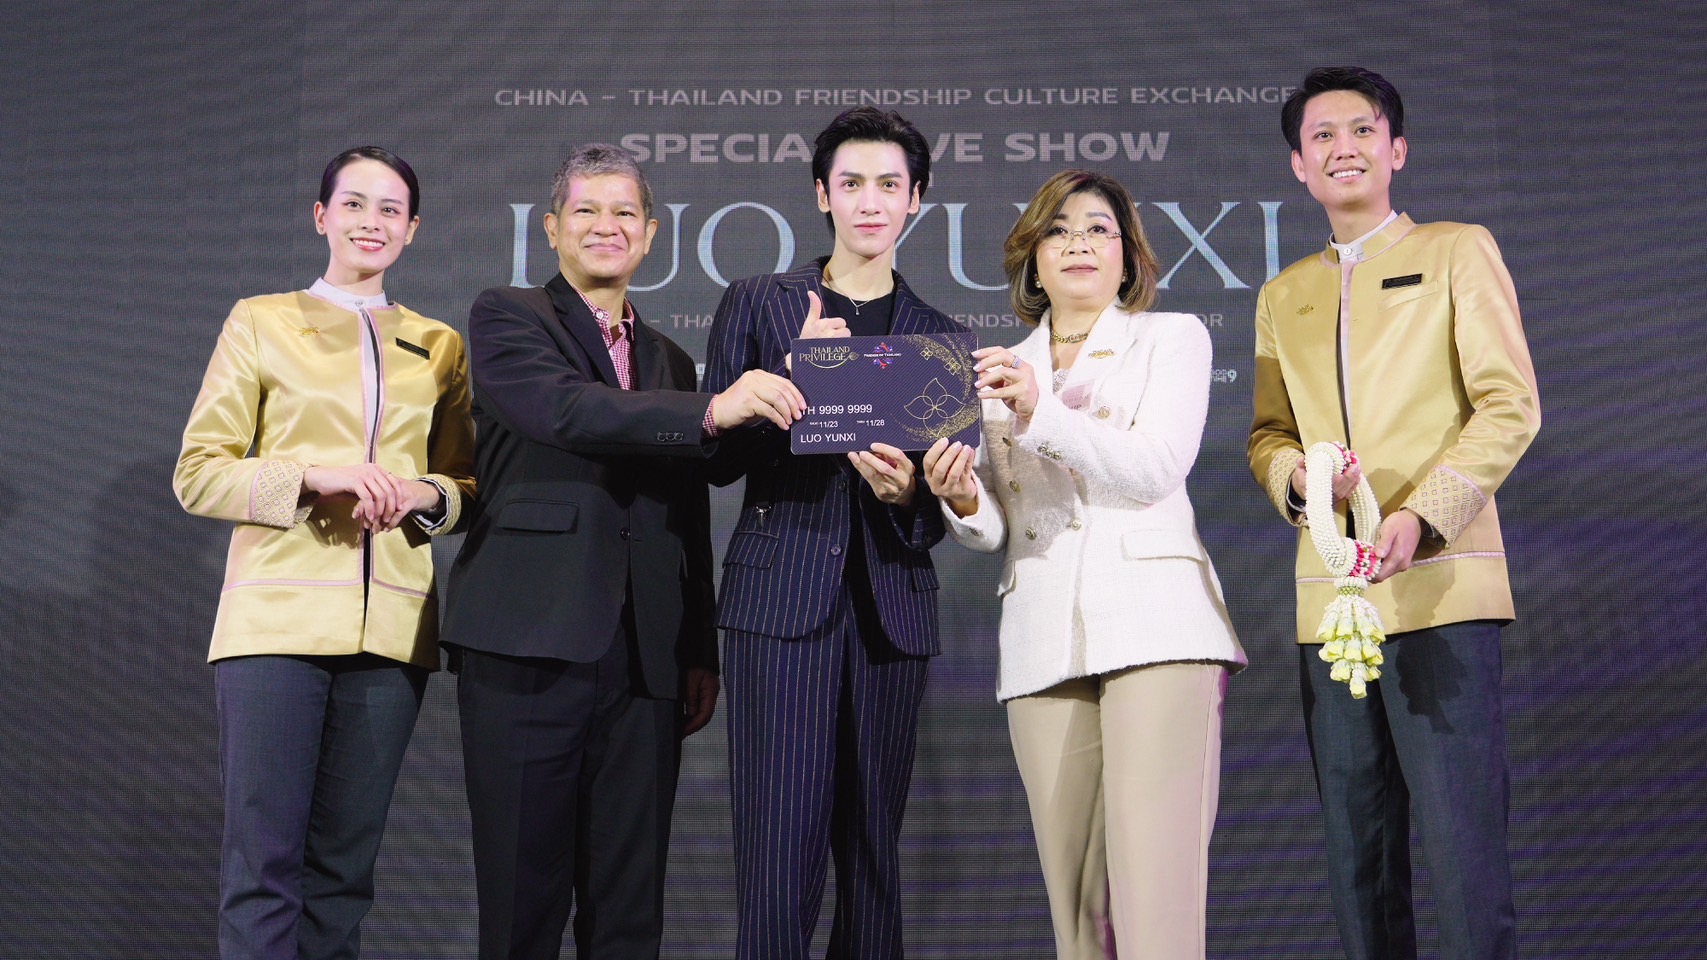 Luo Yunxi presented with ‘Friends of Thailand recognition